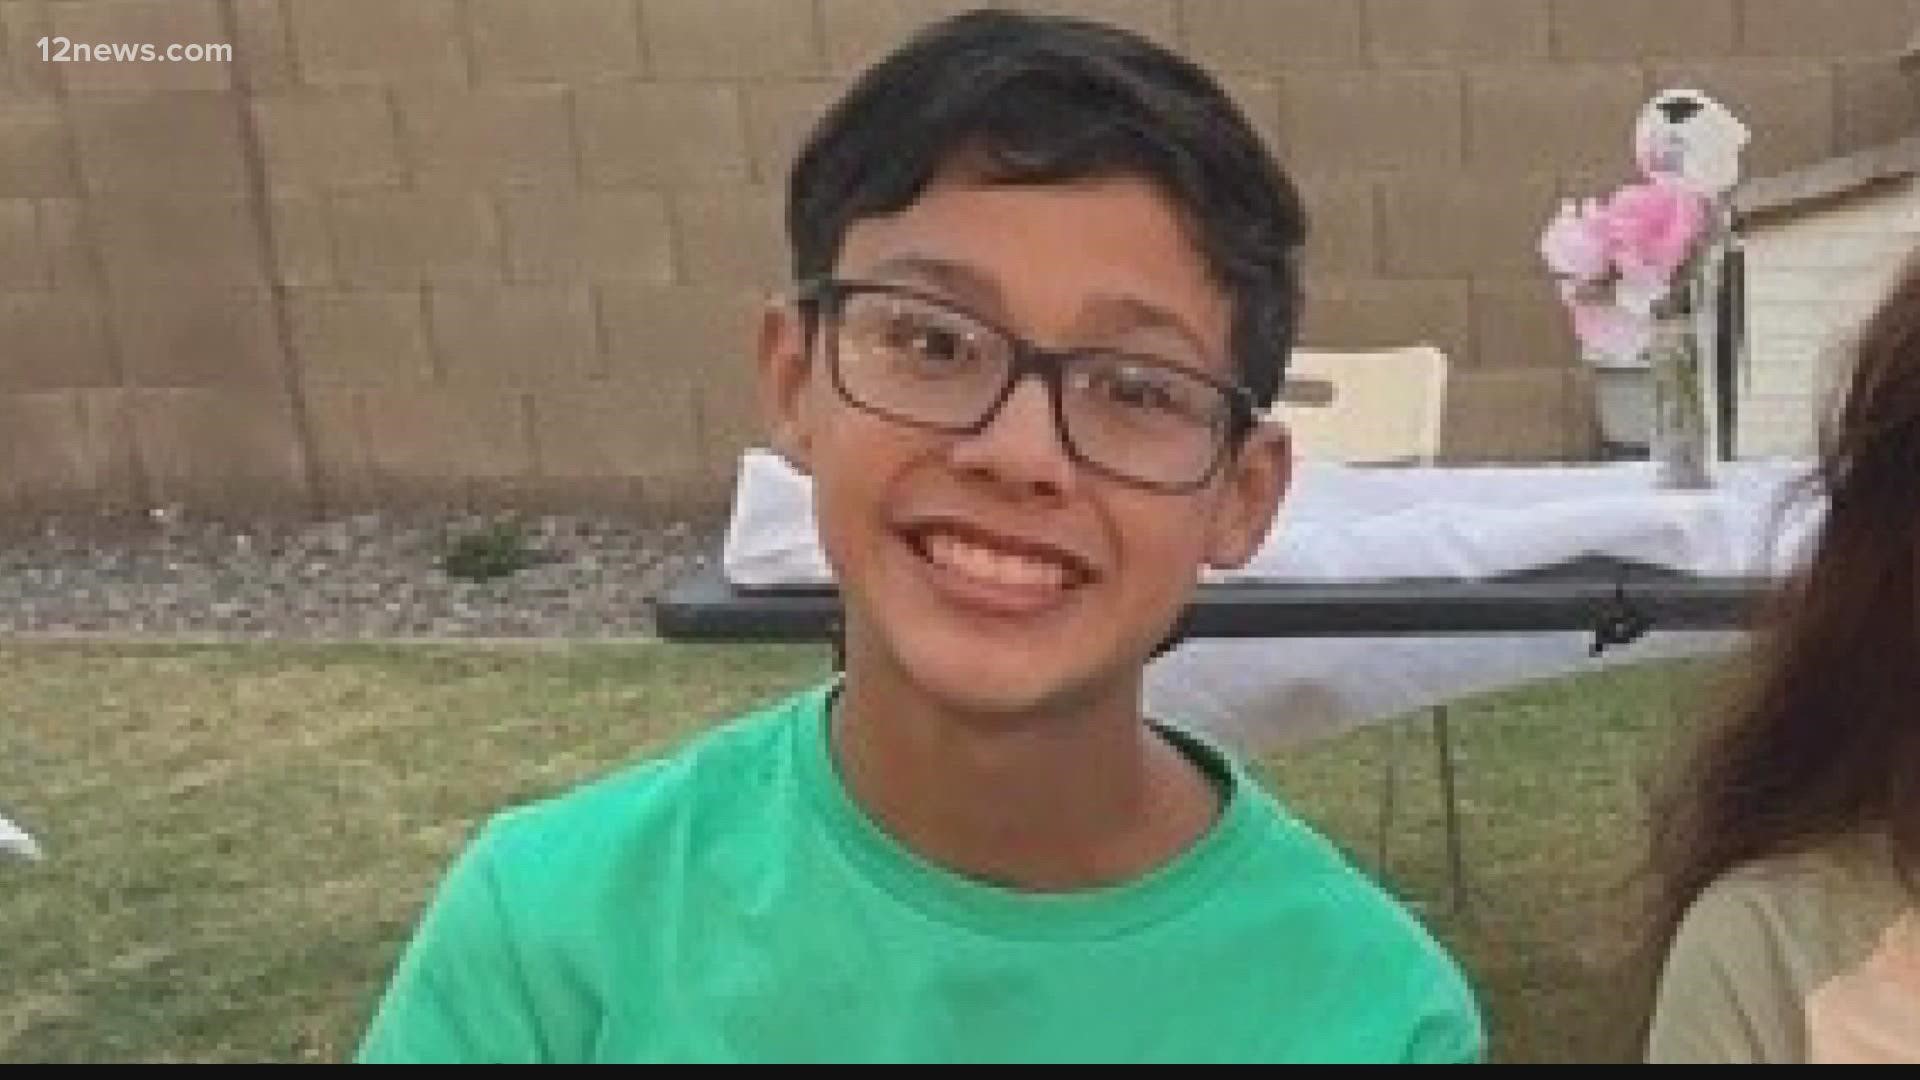 Chris Lucero is not your typical 14-year-old. He loves reading and Harry Potter. He was hit by a car walking to school on Tuesday. He is still in critical condition.